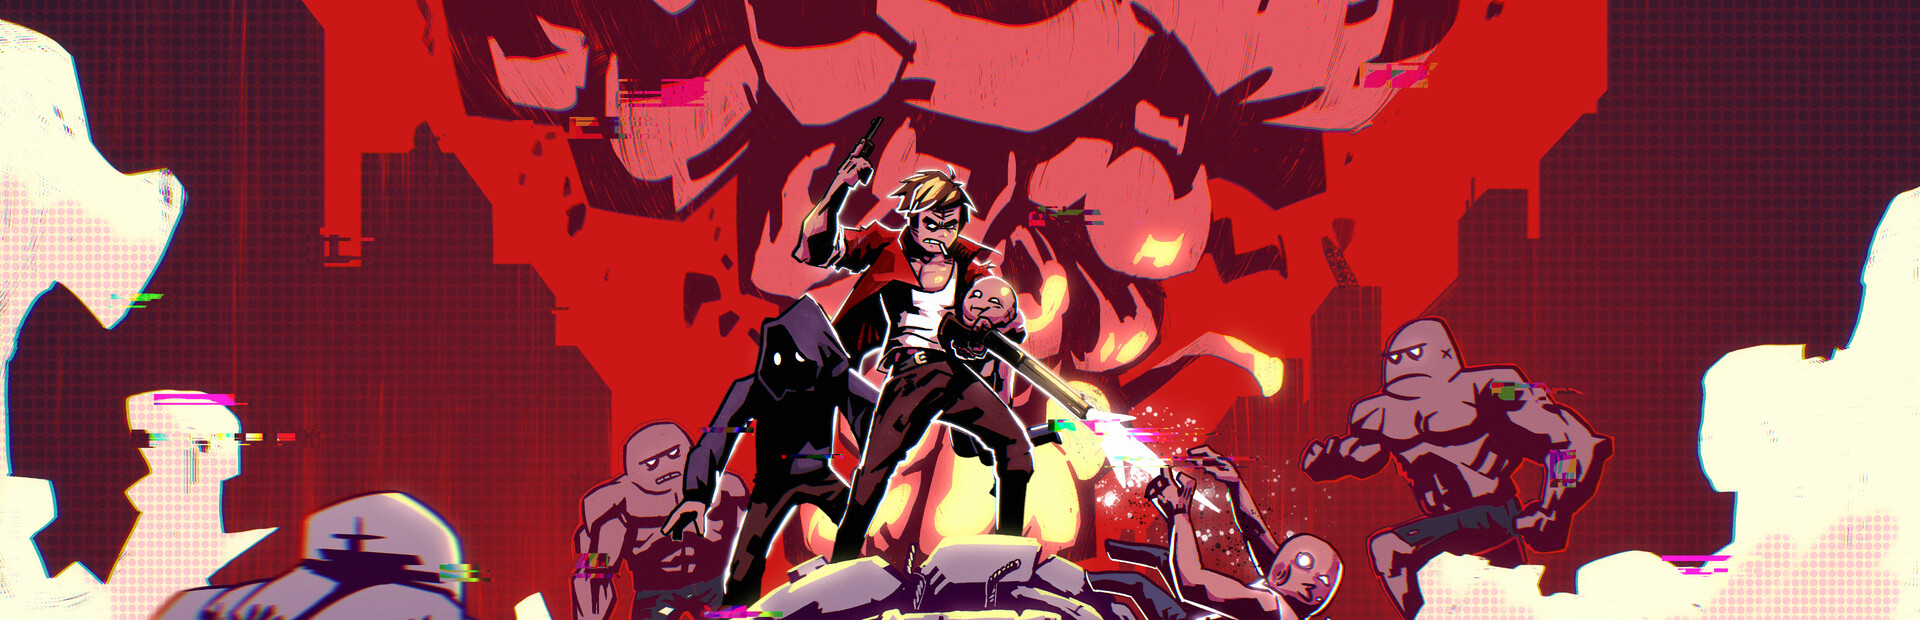 Bullet Runner: The First Slaughter cover image